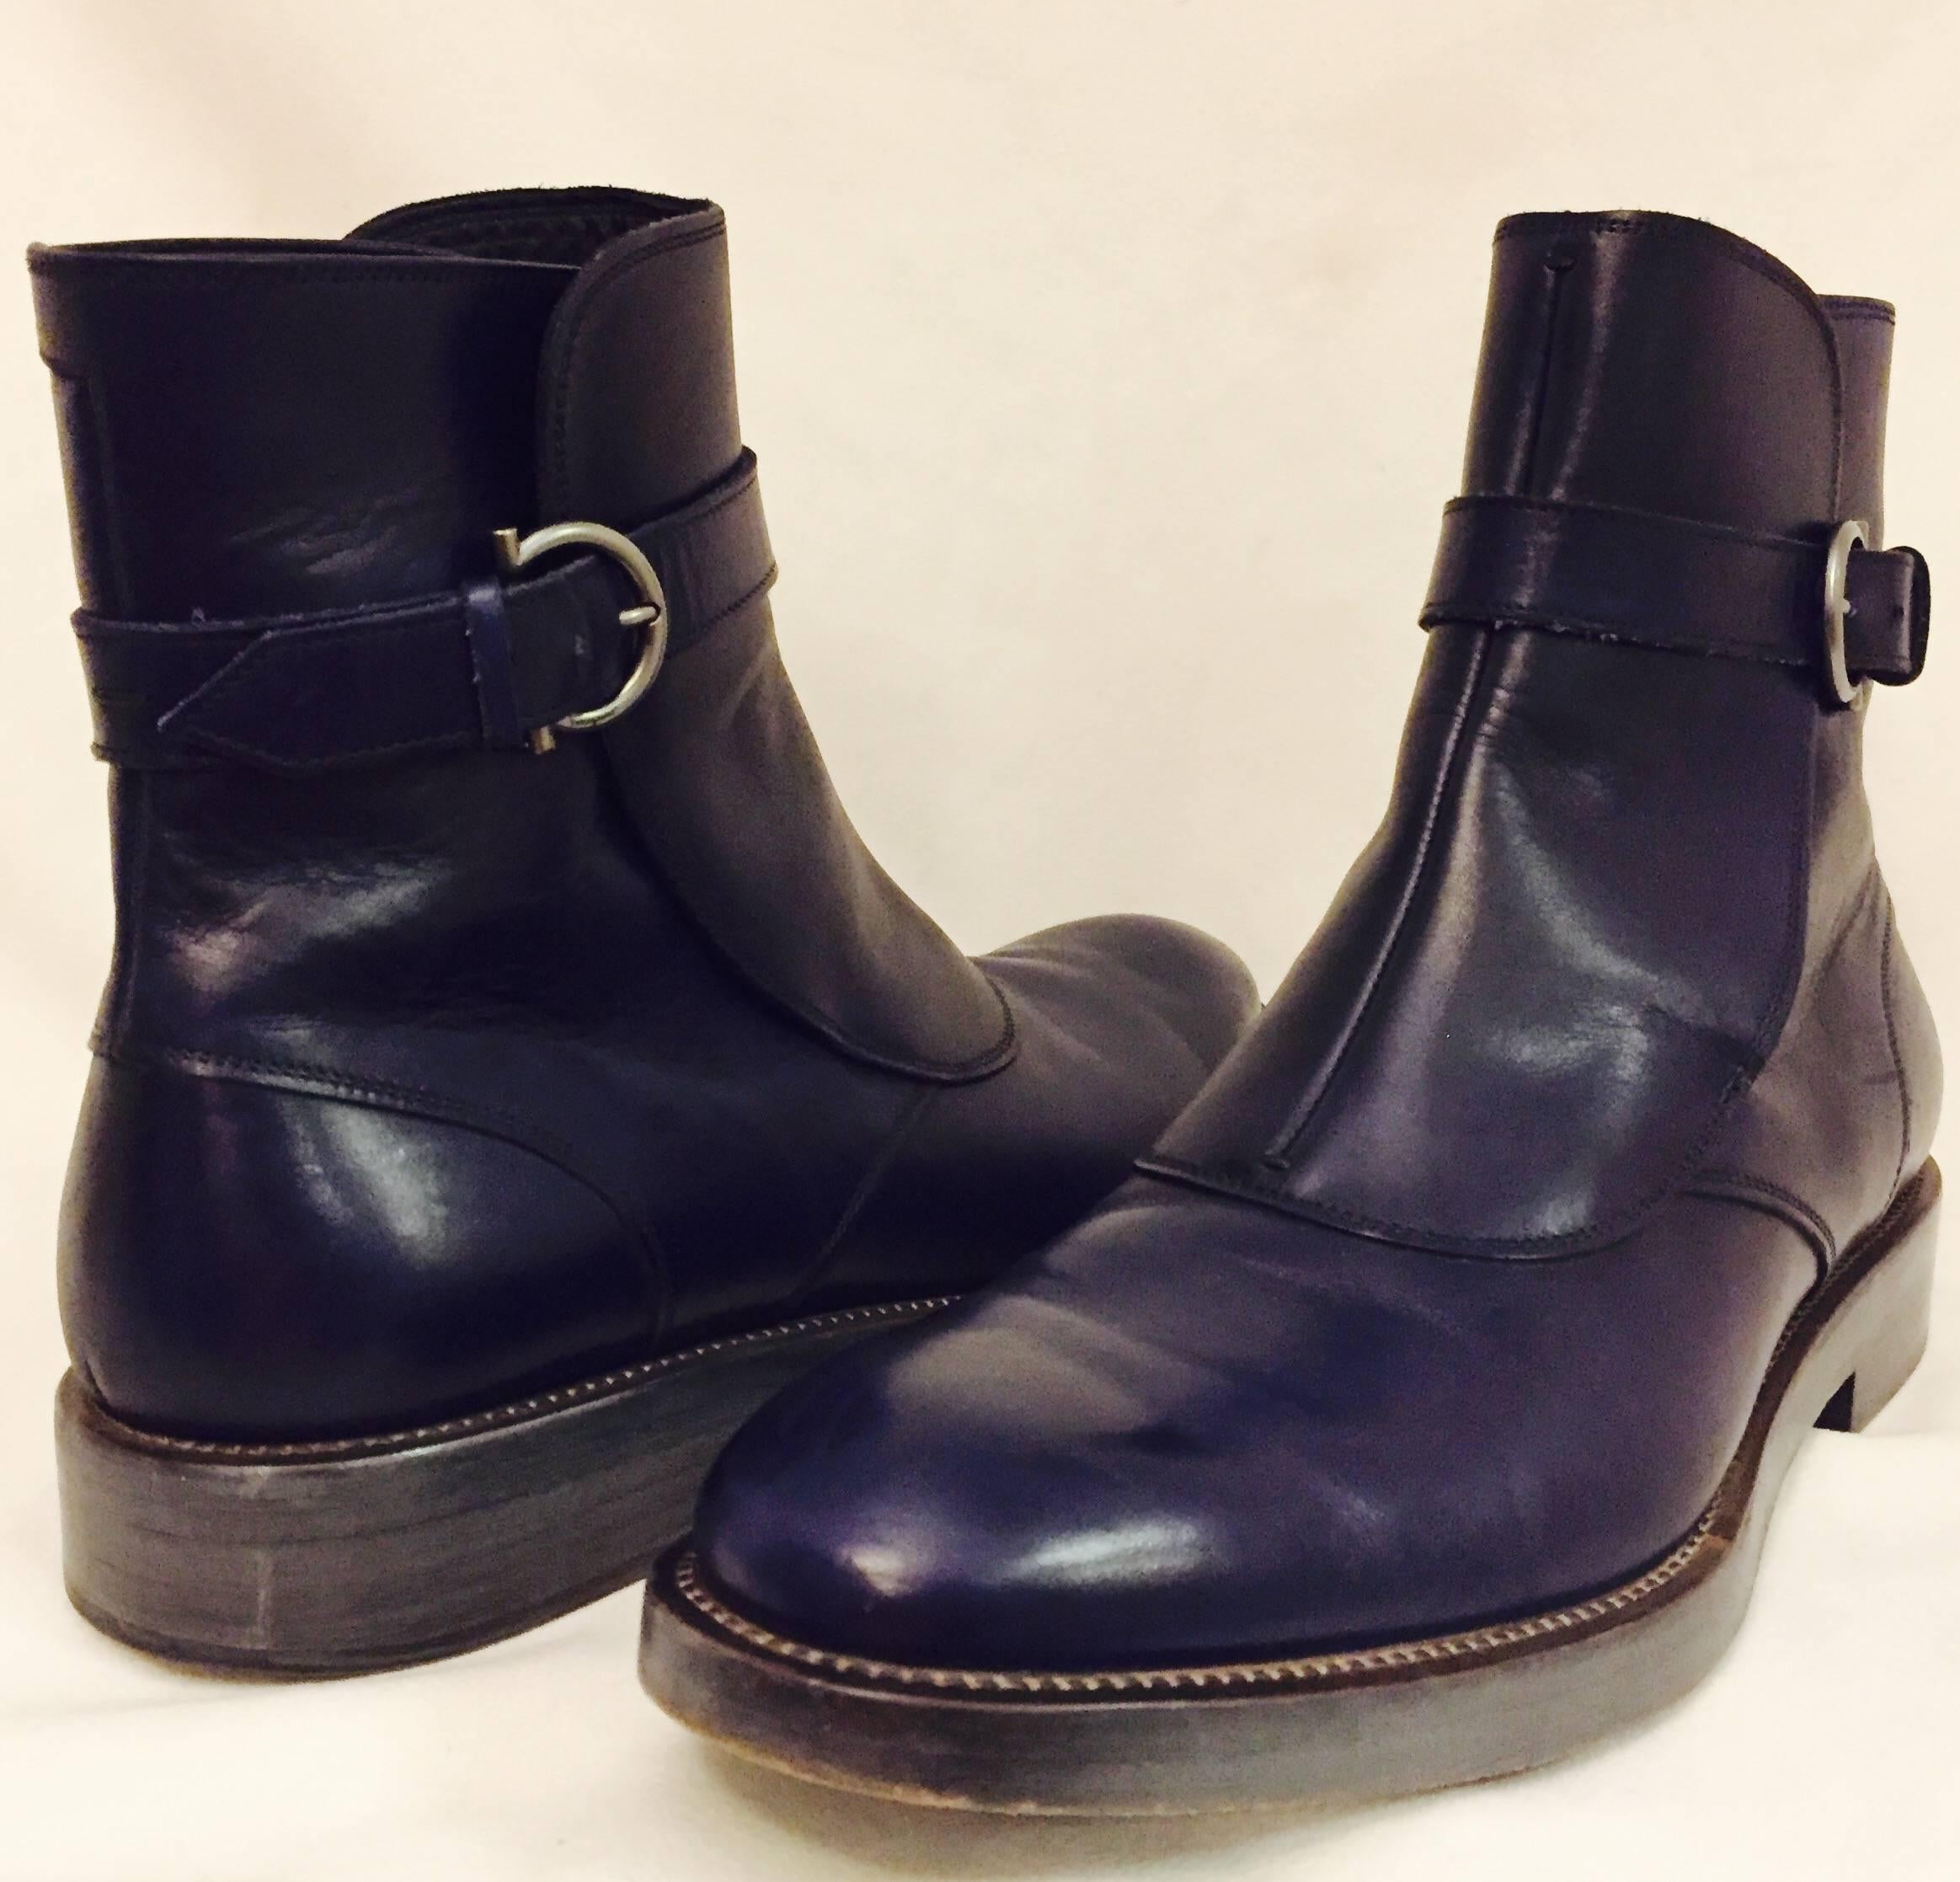 These fabulous Ferragamo ankle boots are in a very unusual lapis blue, sure to turn heads!  Sporting a single strap and a single nickel Gancio buckle adds classic elegance.  The substantial stacked sole is 5/8 inch, and the heel is 1 1/4 inch. Very